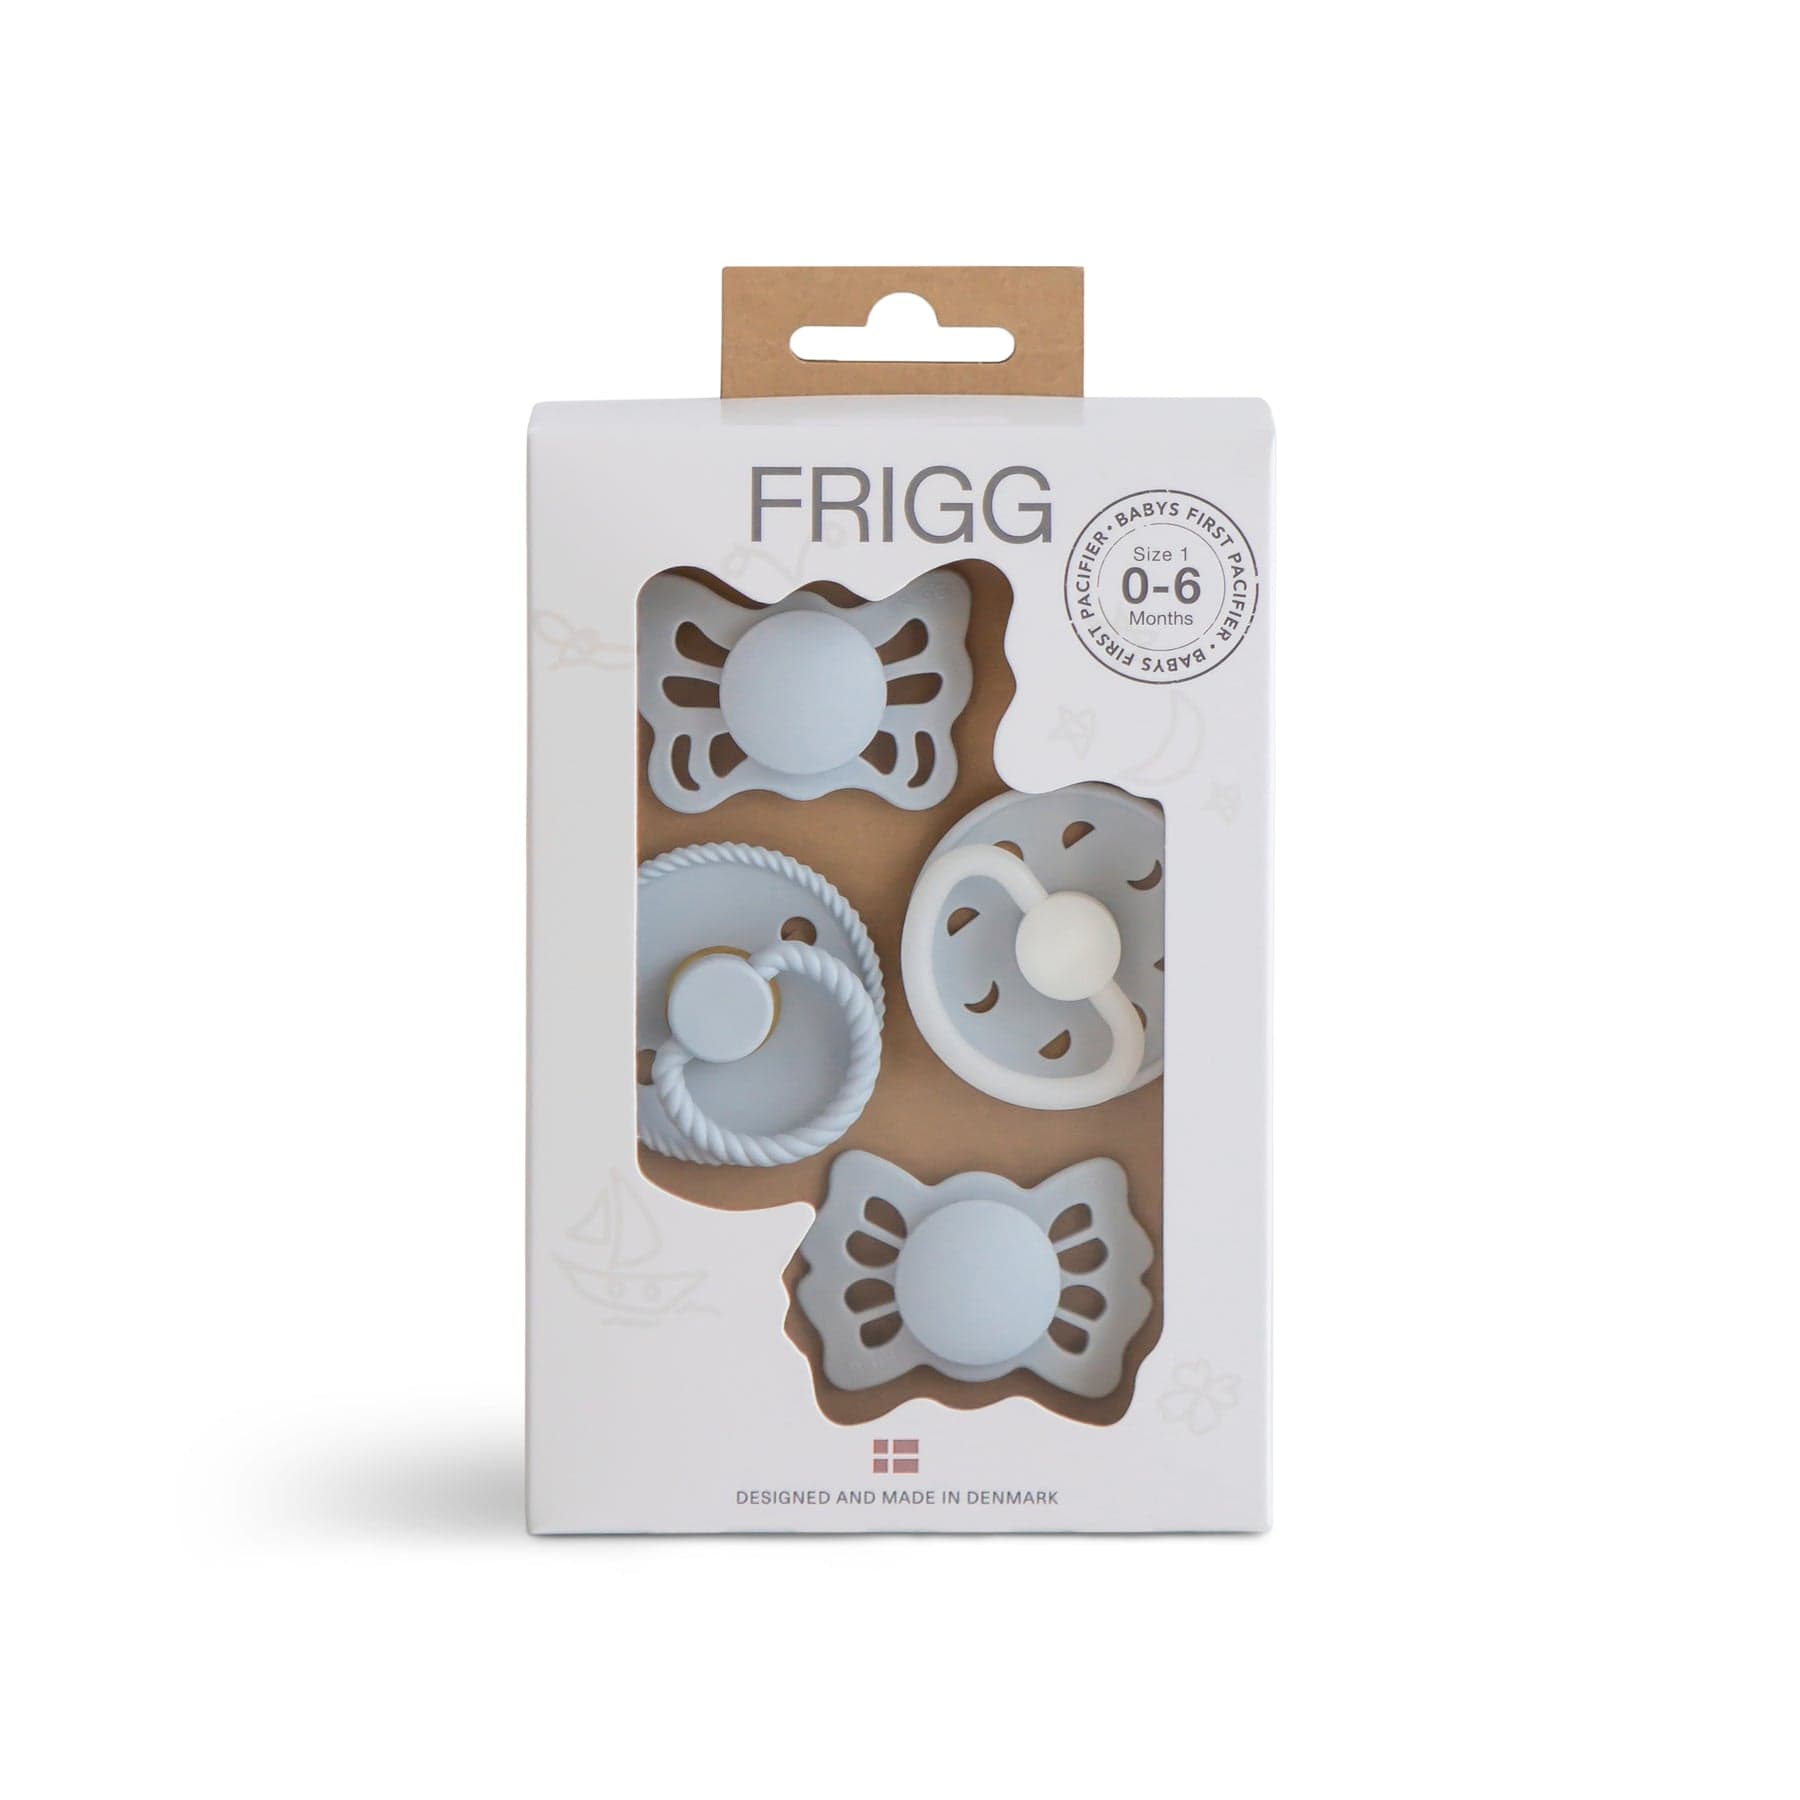 Frigg Baby Accessory Moonlight Sailing Powder Blue Baby's First Pacifier 4 Pack